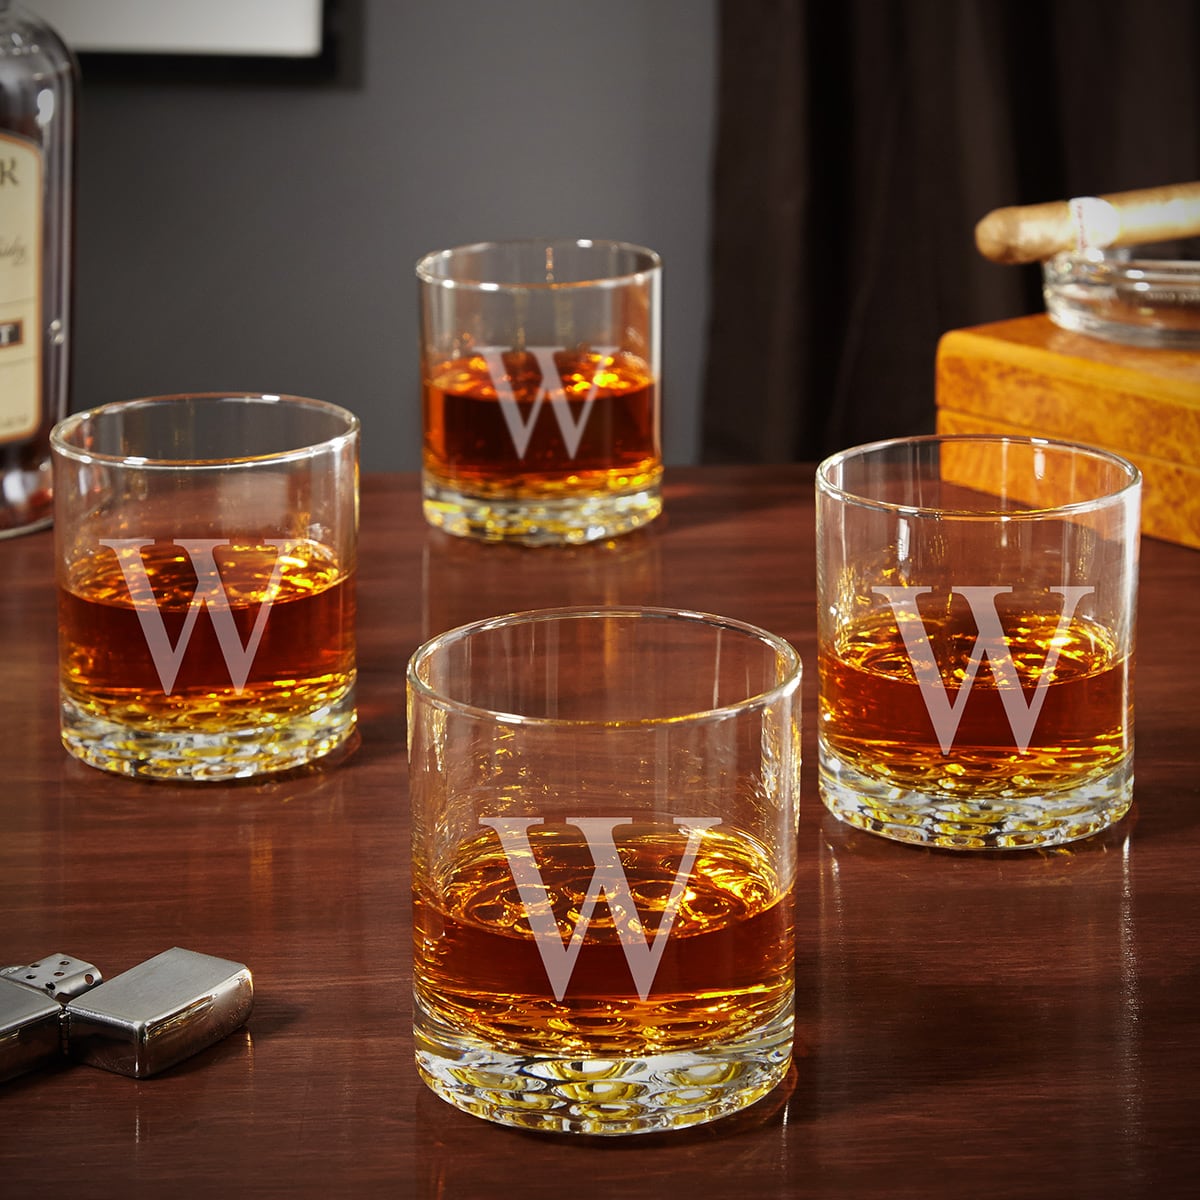 Buckman Personalized Old Fashioned Glasses, Set of 4